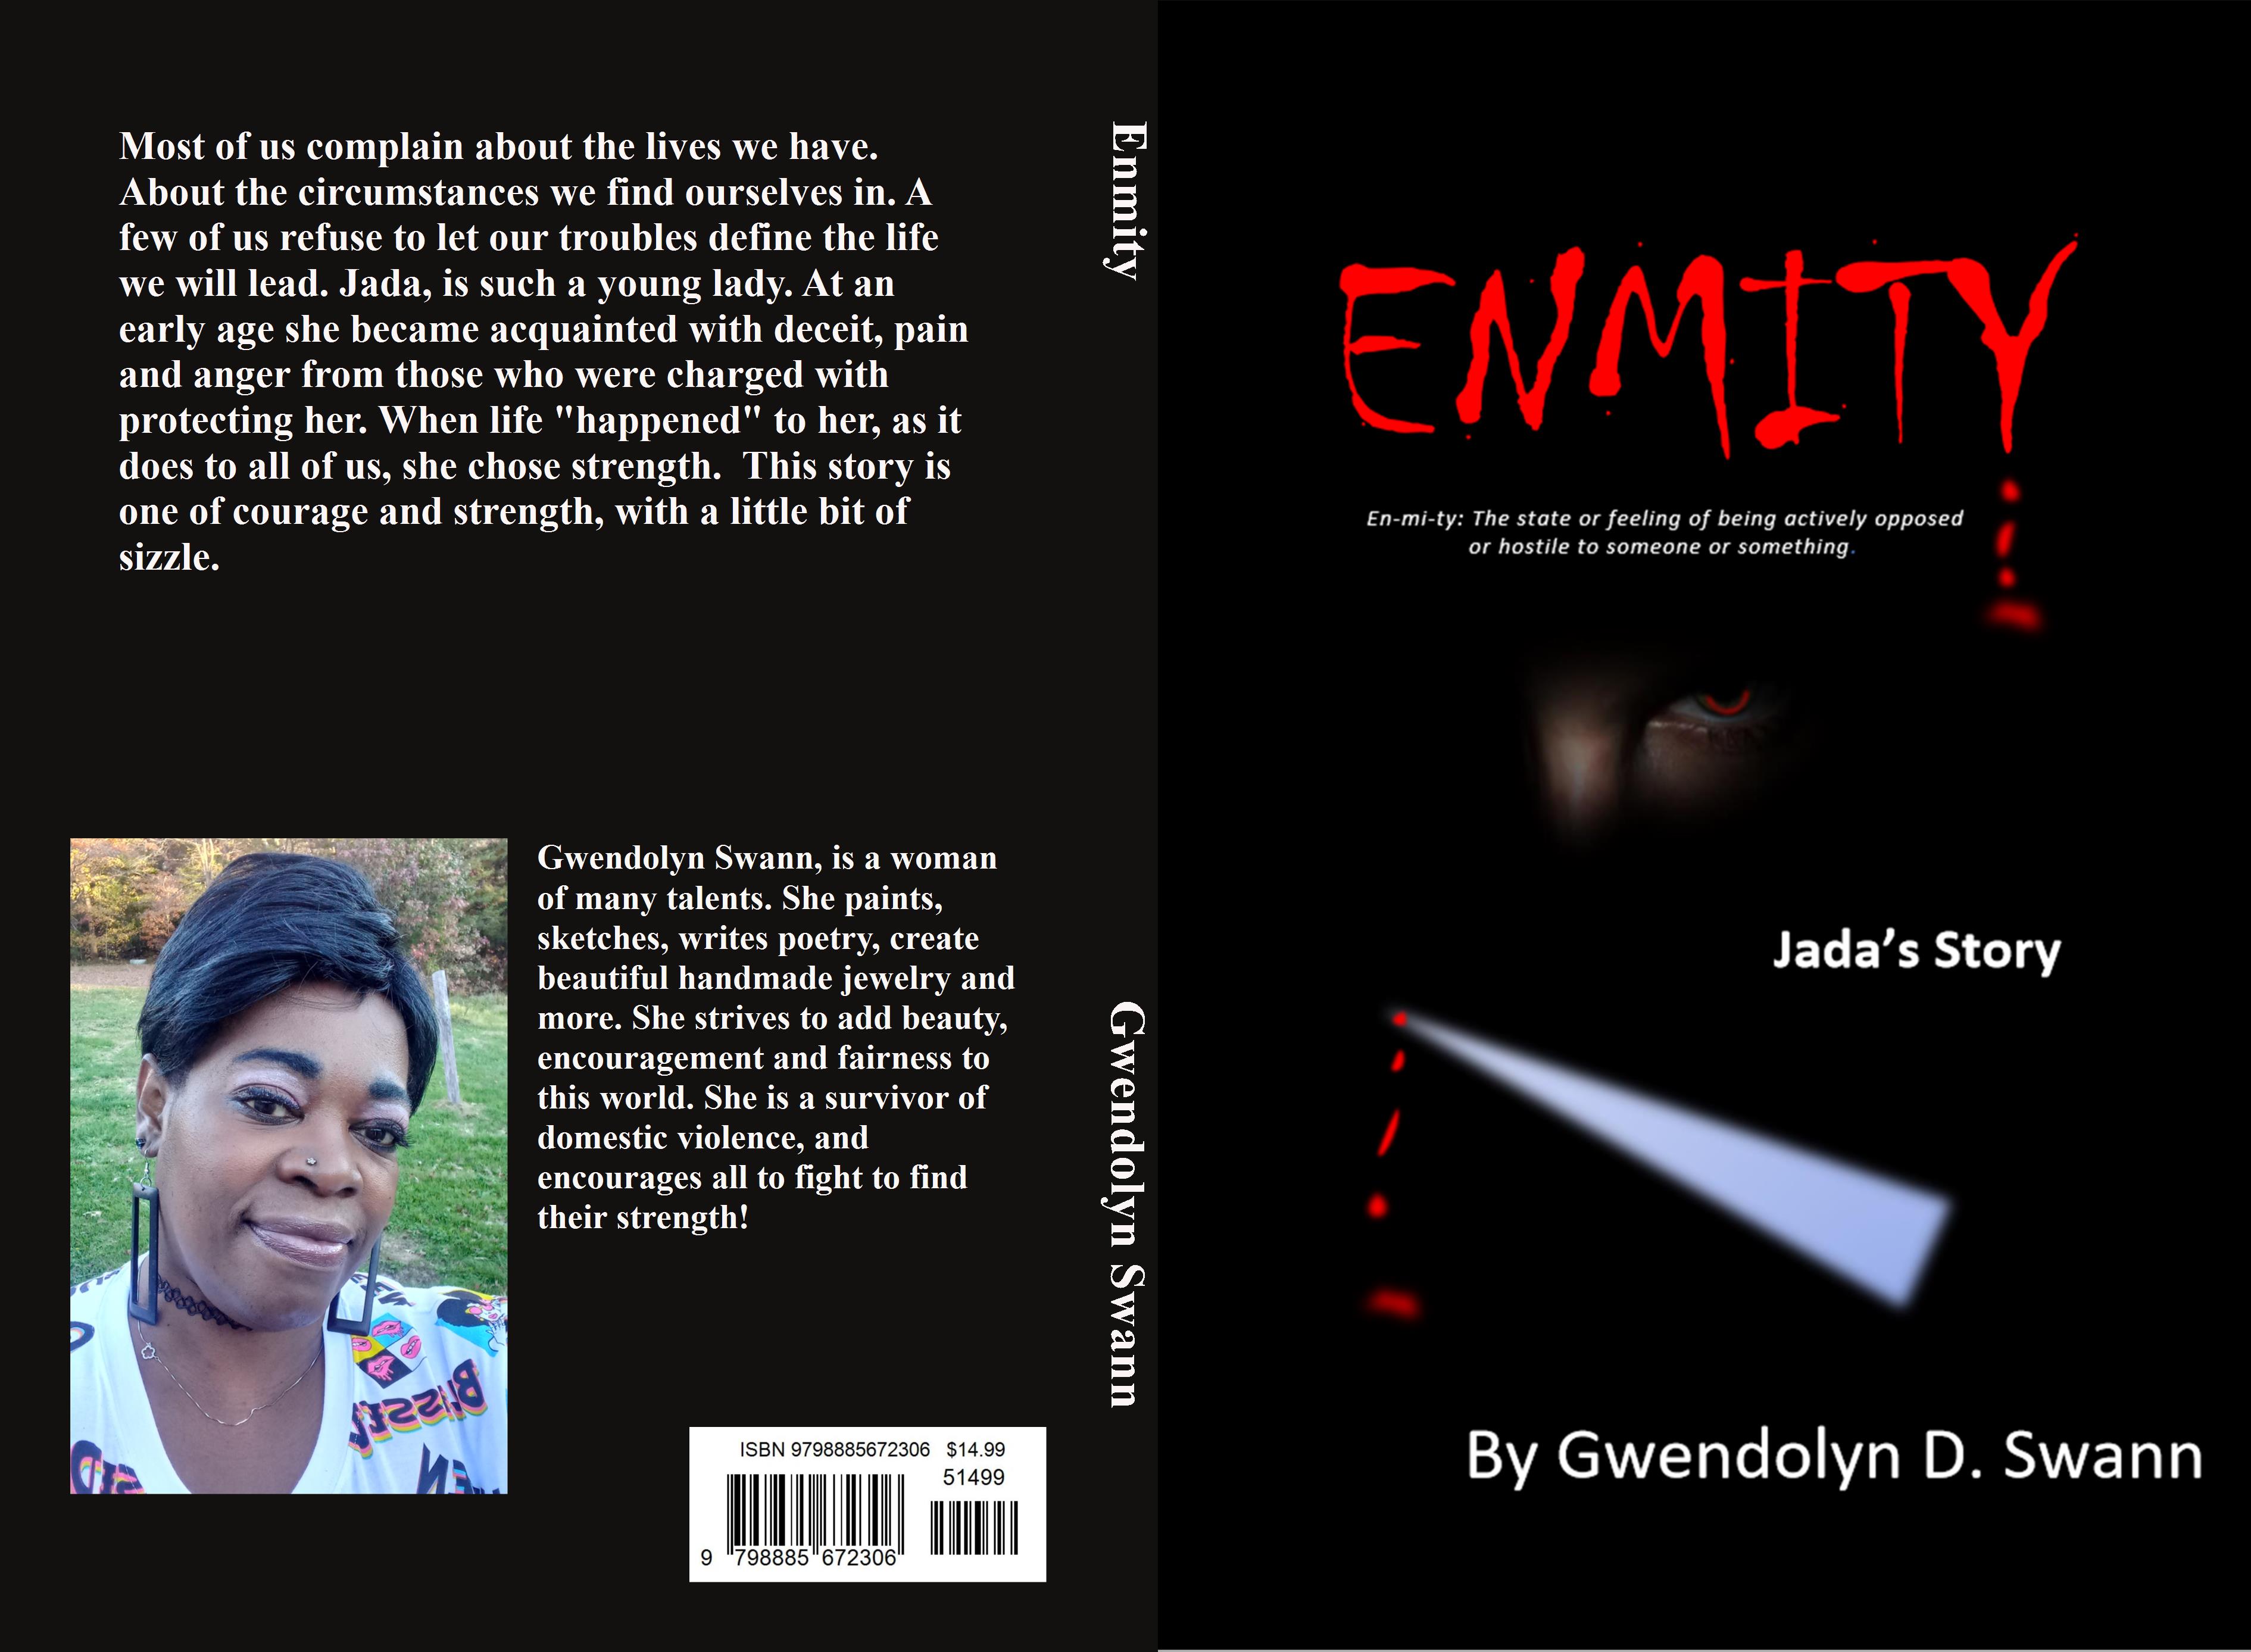 Enmity cover image